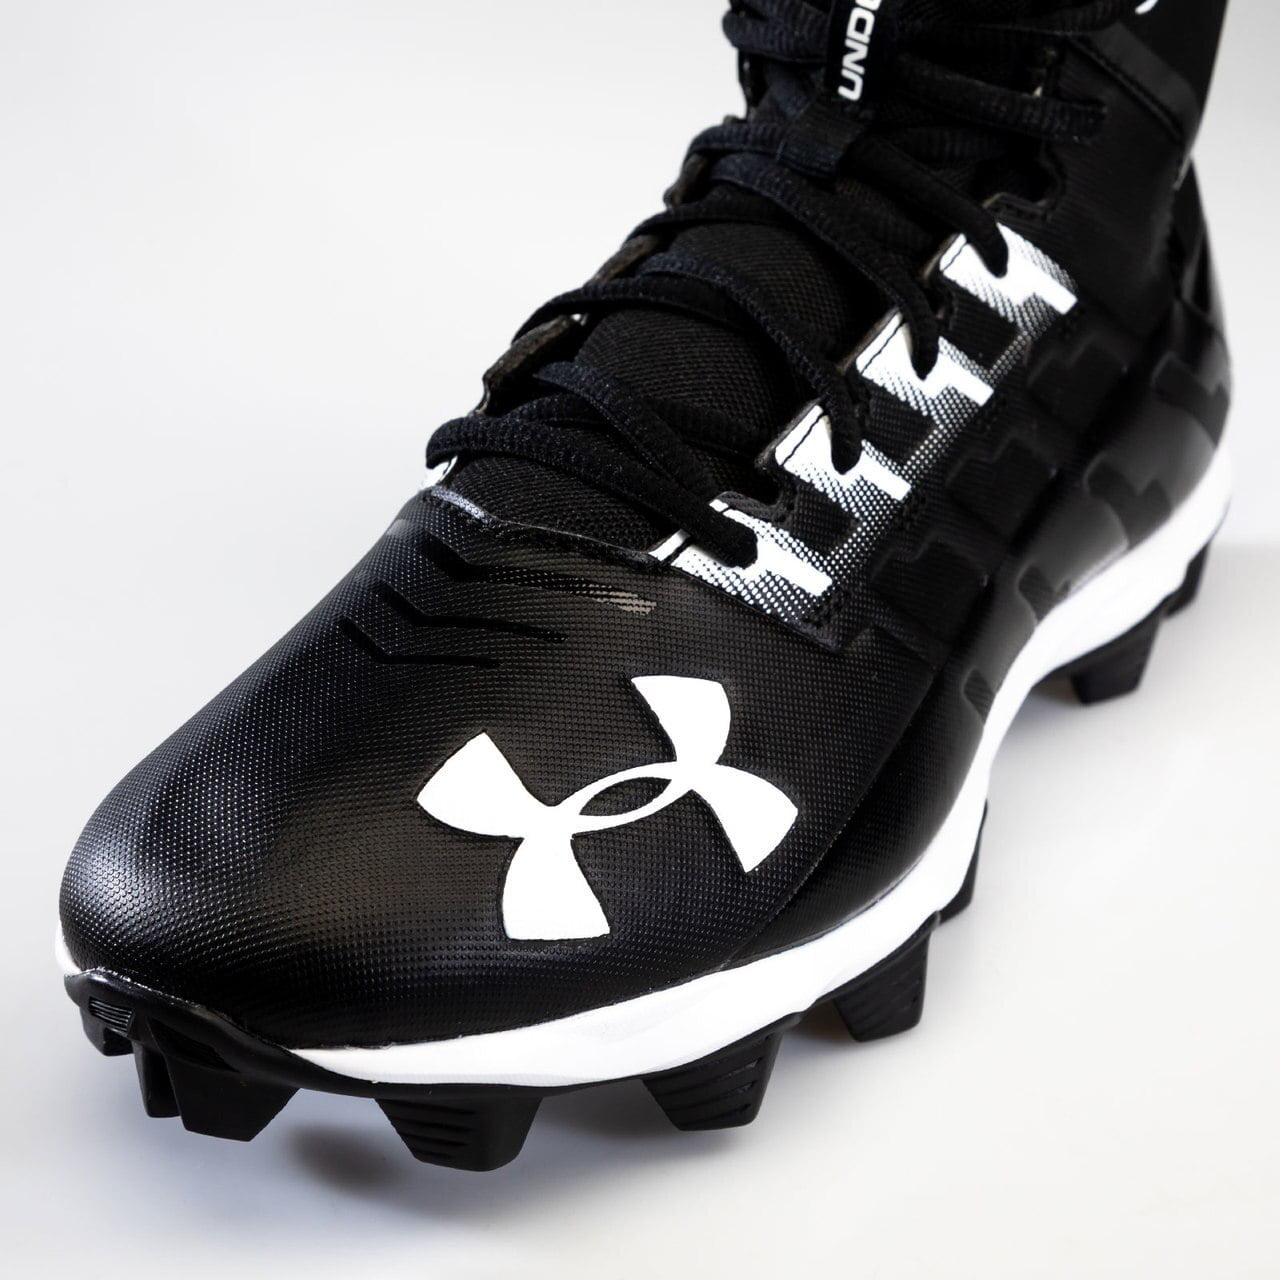 New Youth Under Armour Renegade RM Mid Football Cleats Black/White Sz 5 Y 